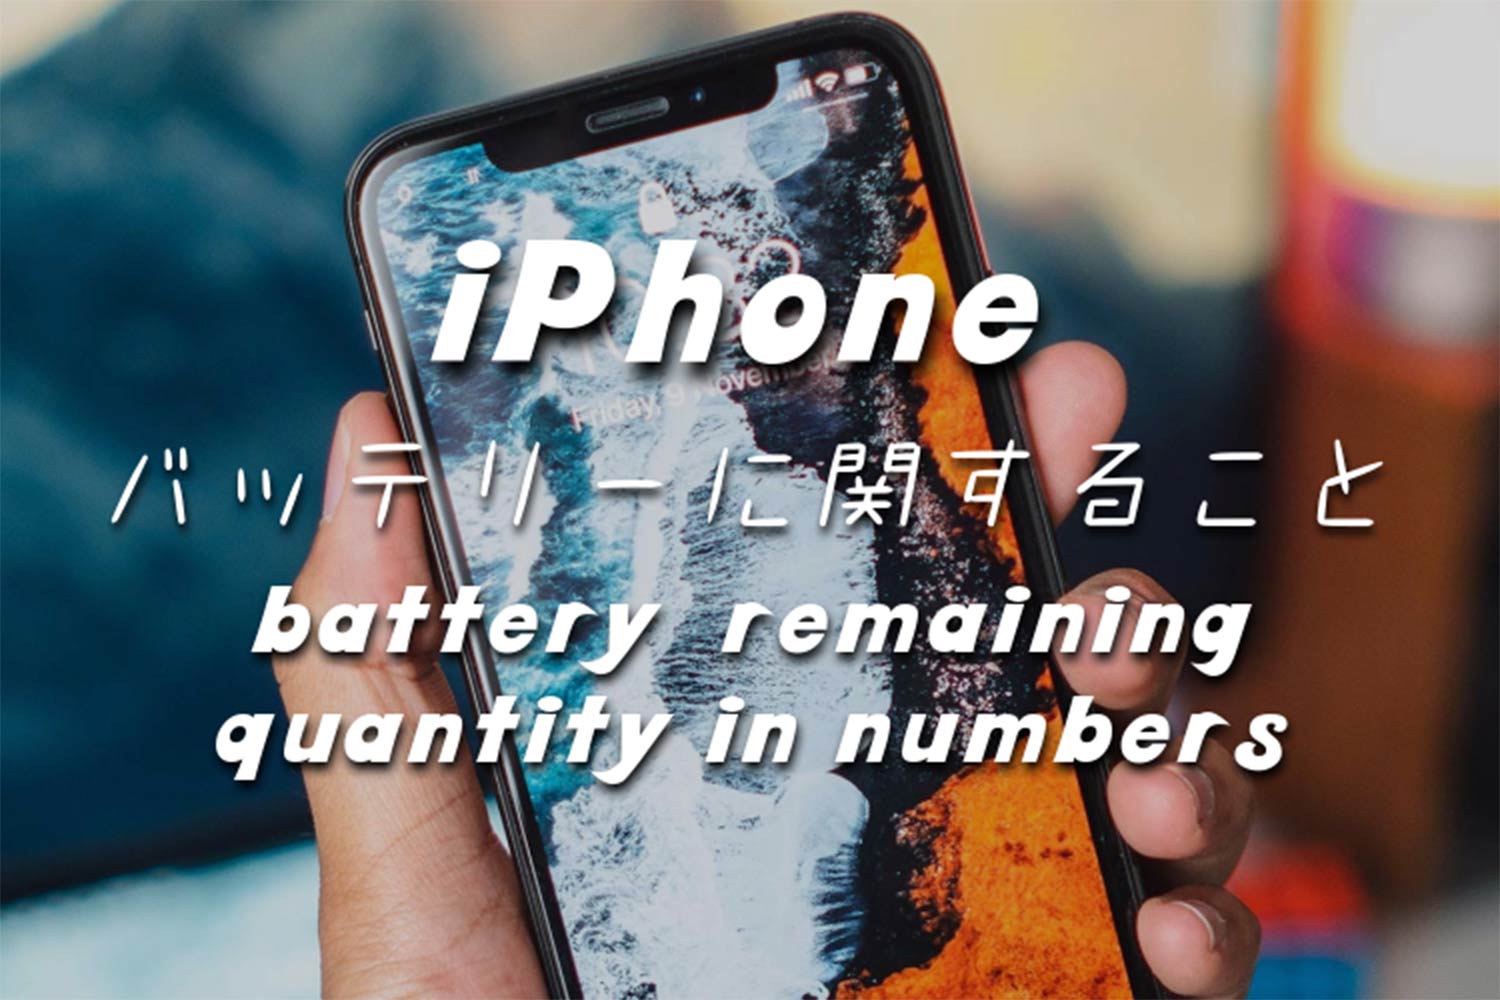 iPhone battery remaining quantity in numbers (%) thumbnail